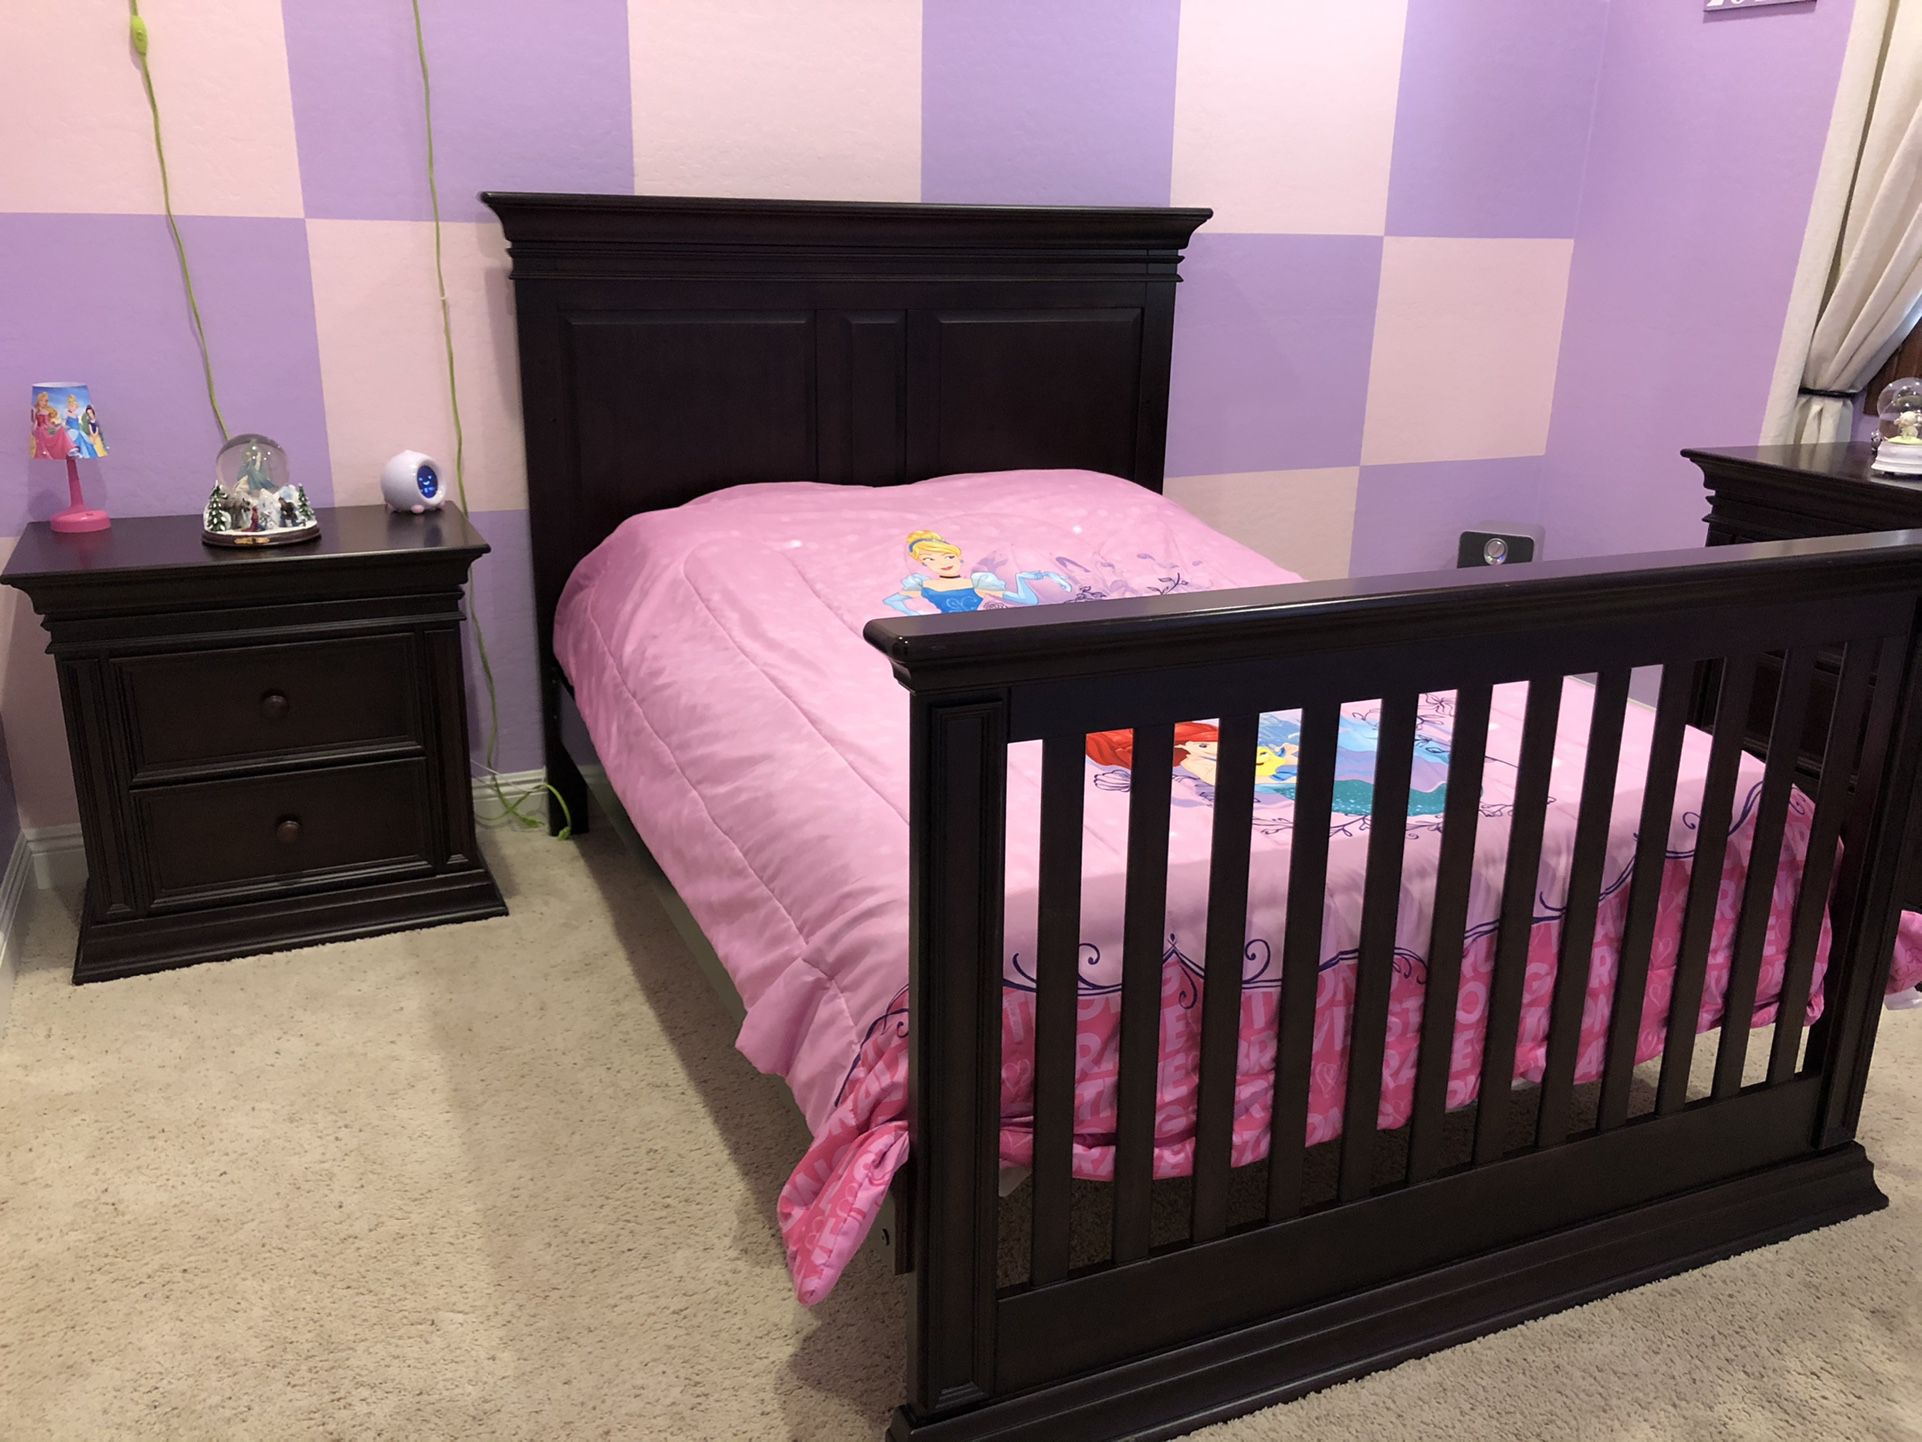 Baby/Kids bedroom set - 4 in 1 crib, toddler bed to full bed